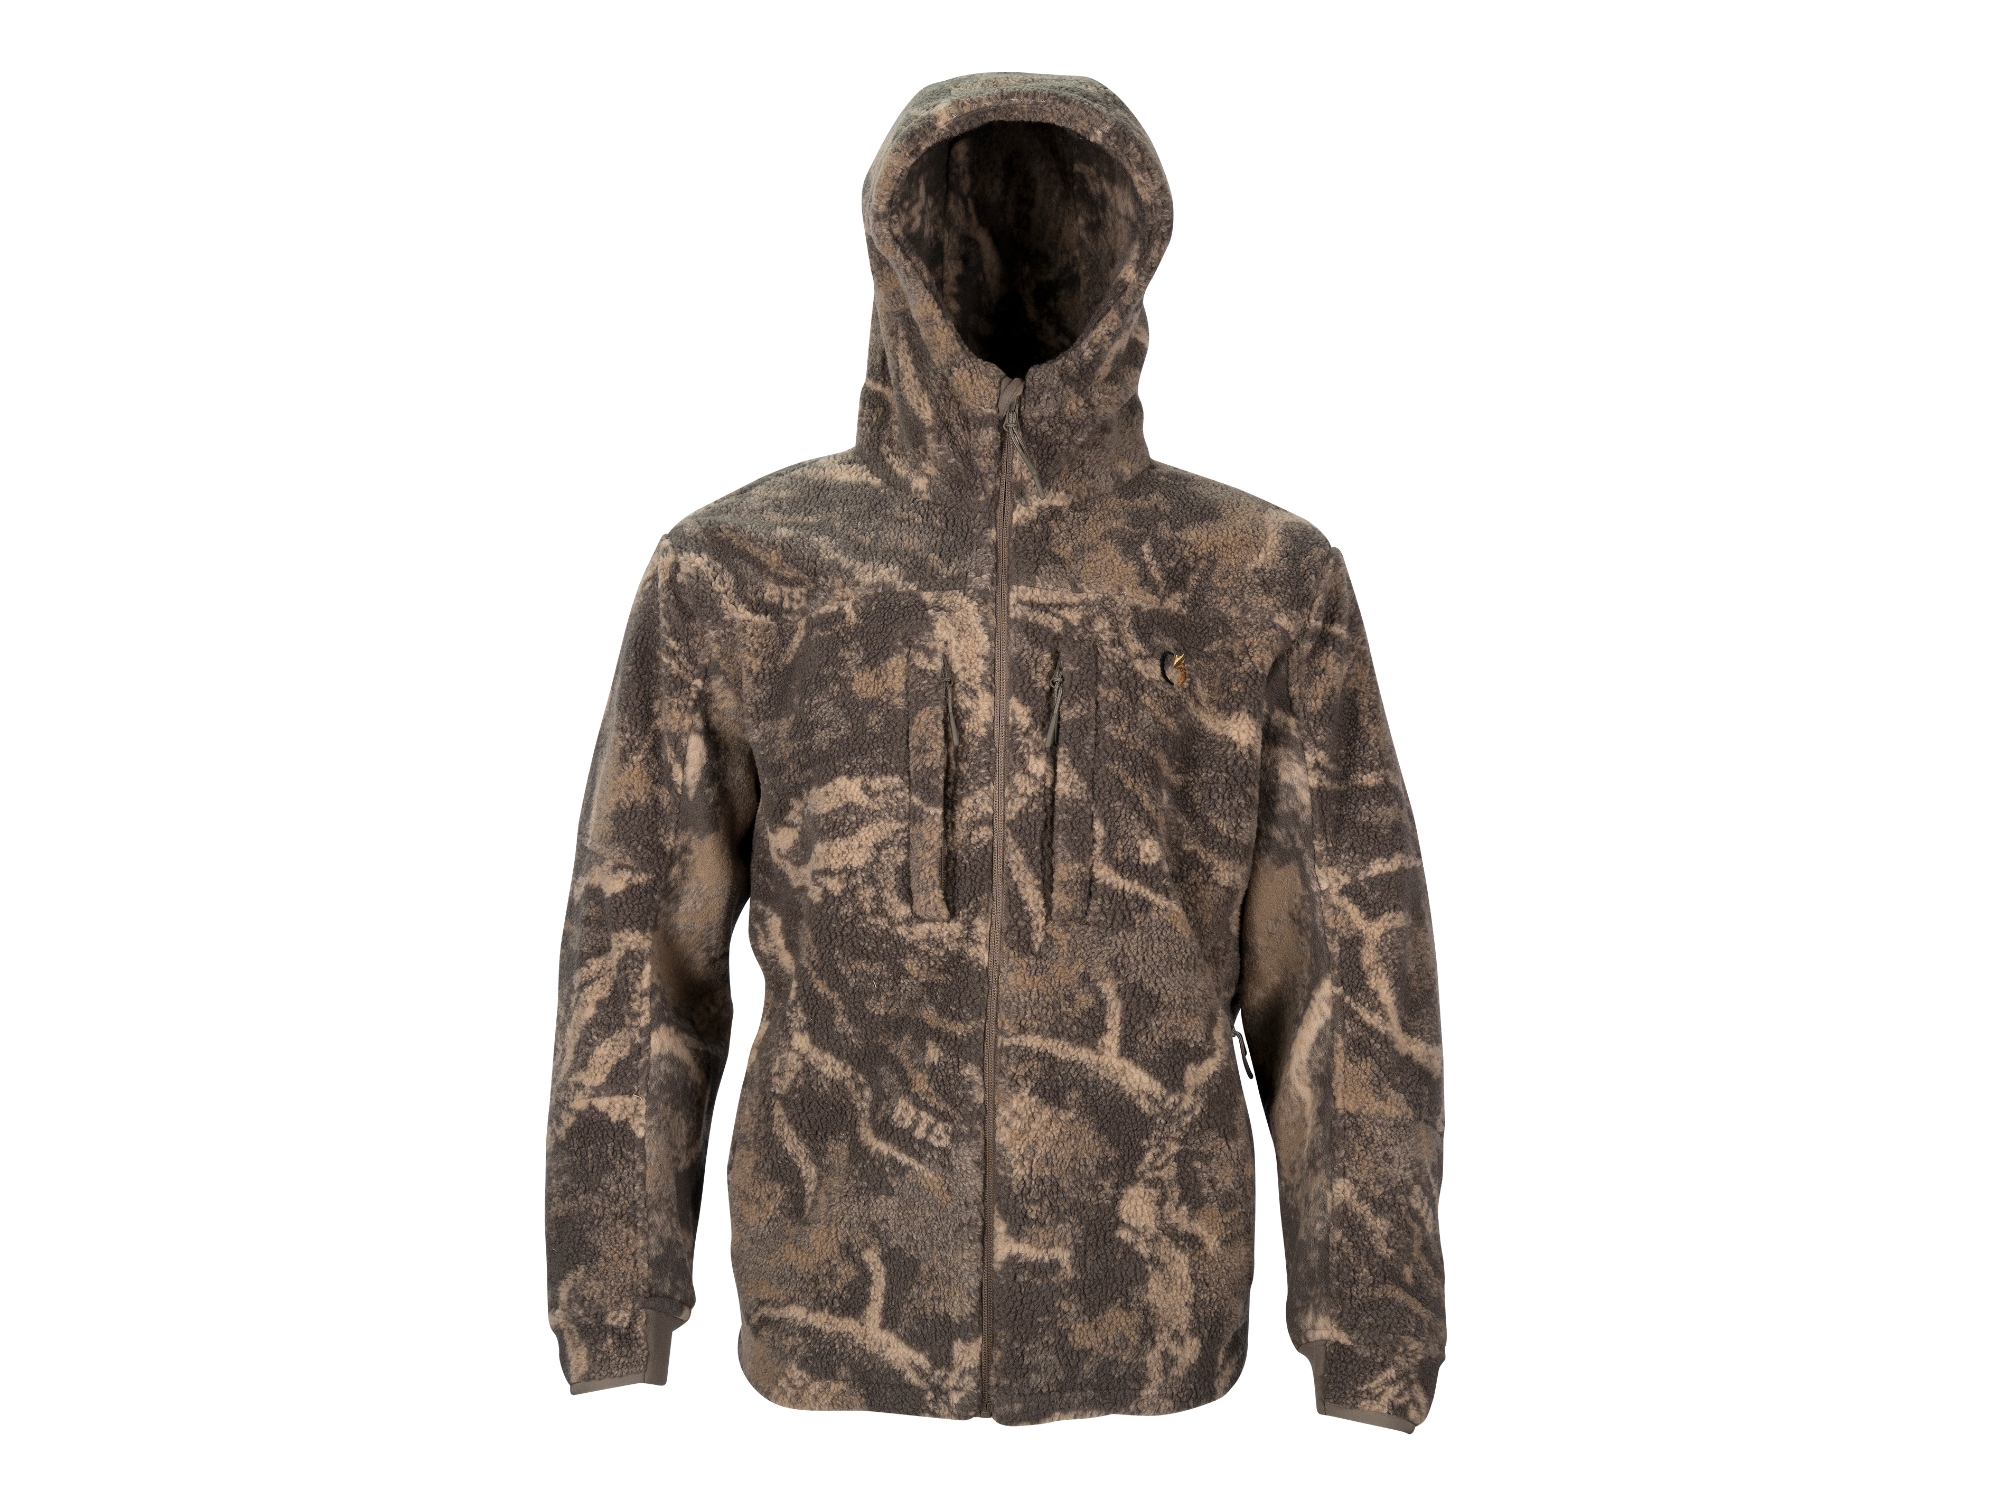 Code of Silence Zone 7 - Dialed In Parka, Large, S-18 CAMO